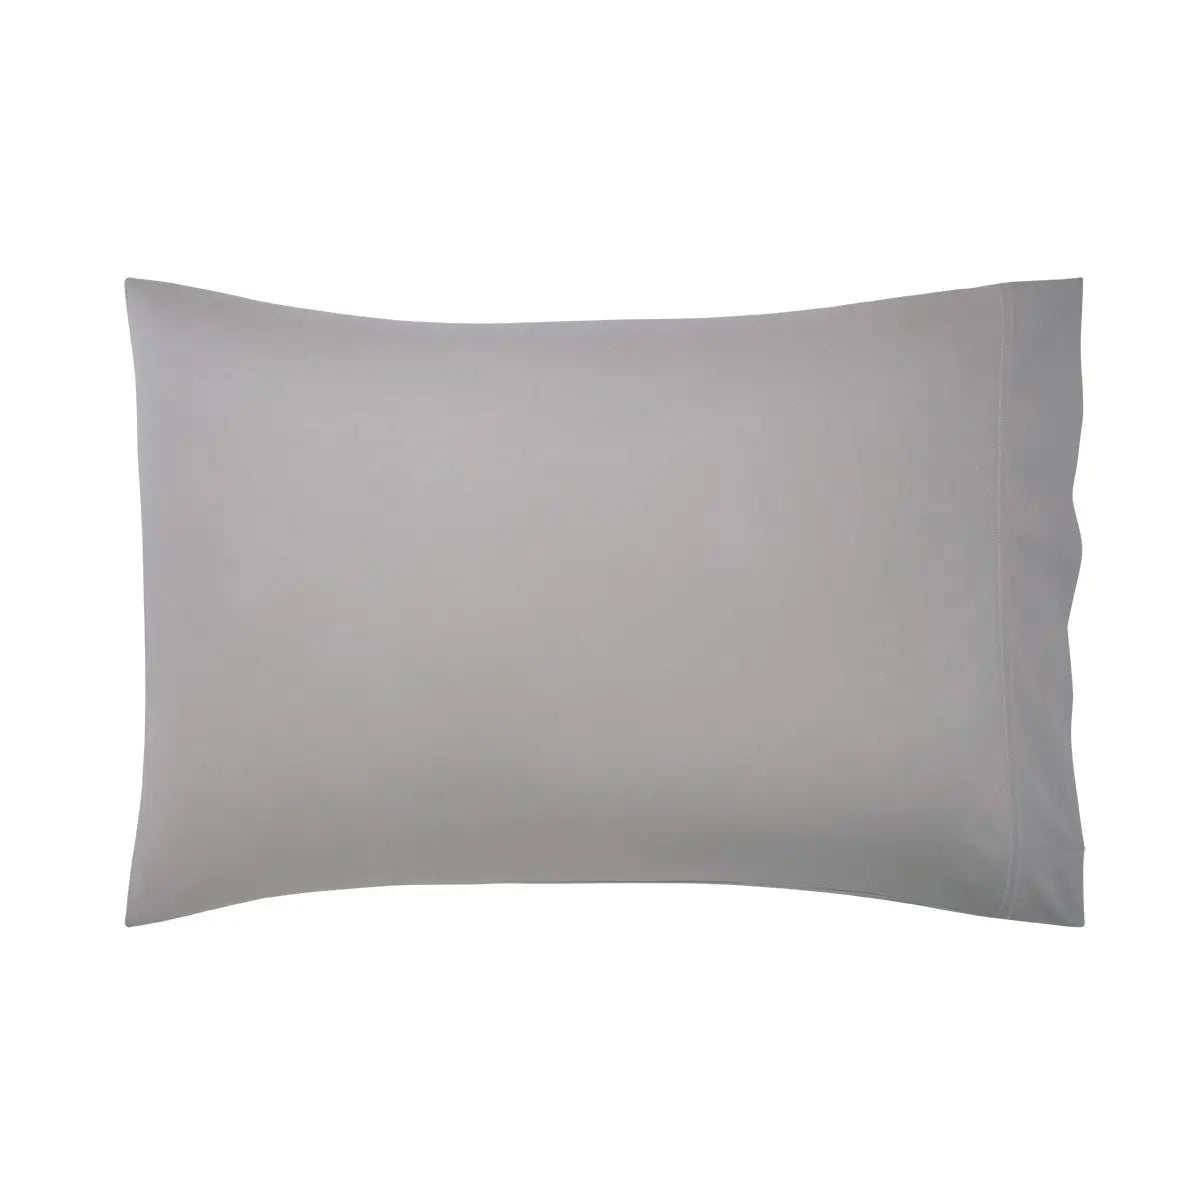 Yves Delorme Triomphe Pillowcase in Platine